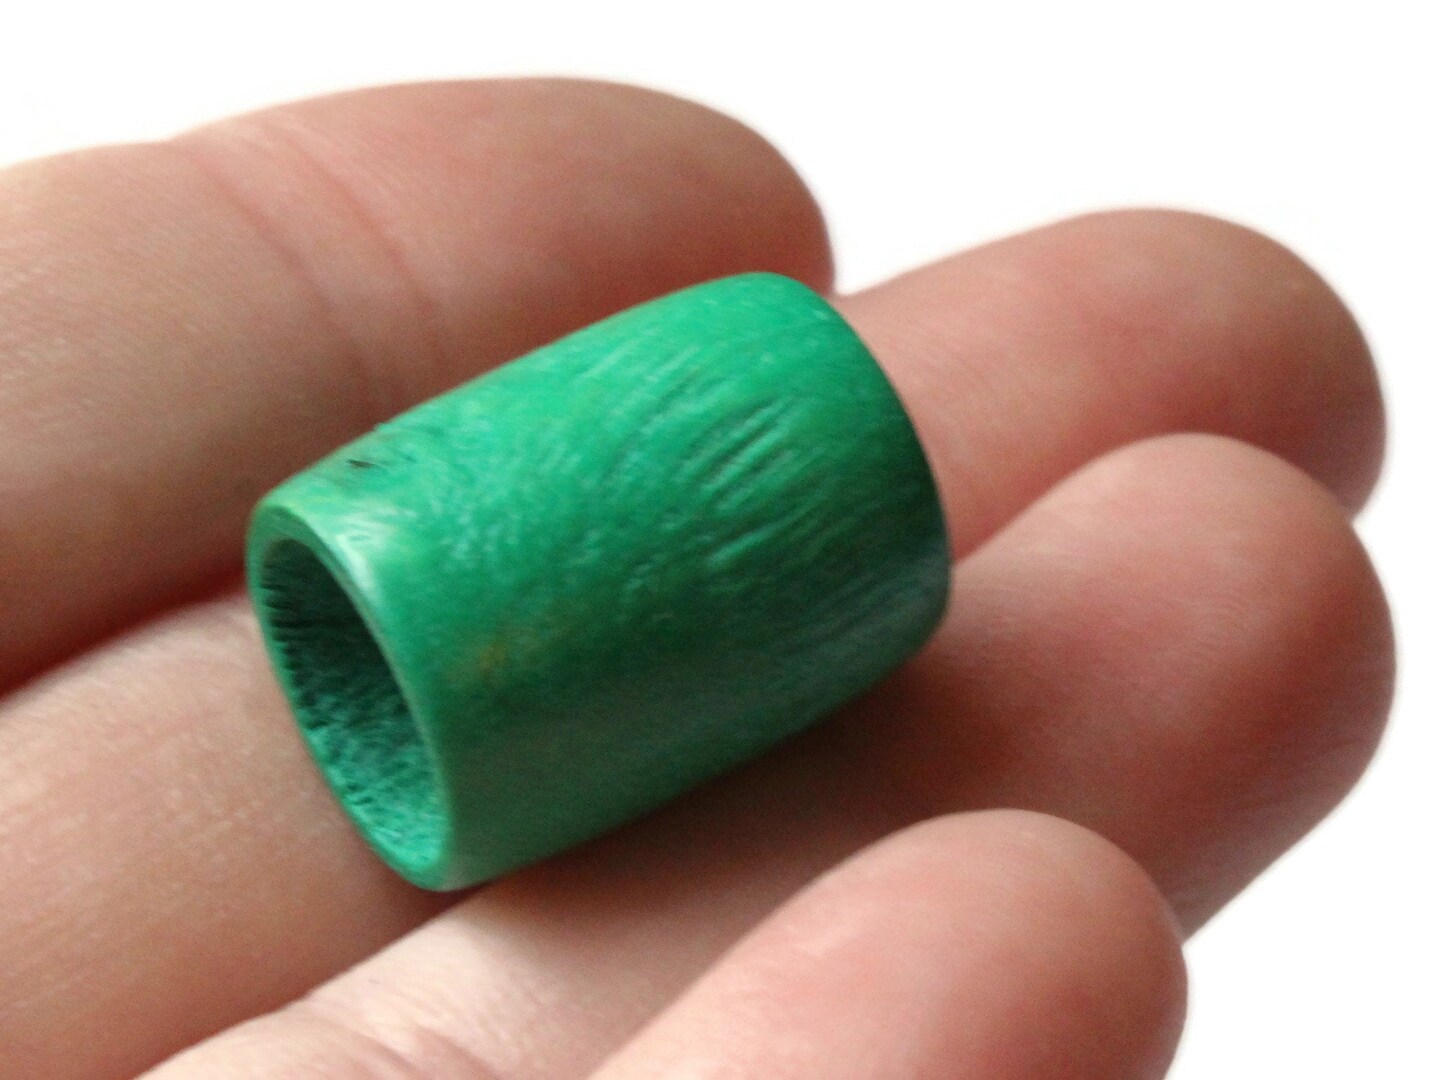 8 19mm x 15mm Vintage Green Wooden Tube Beads